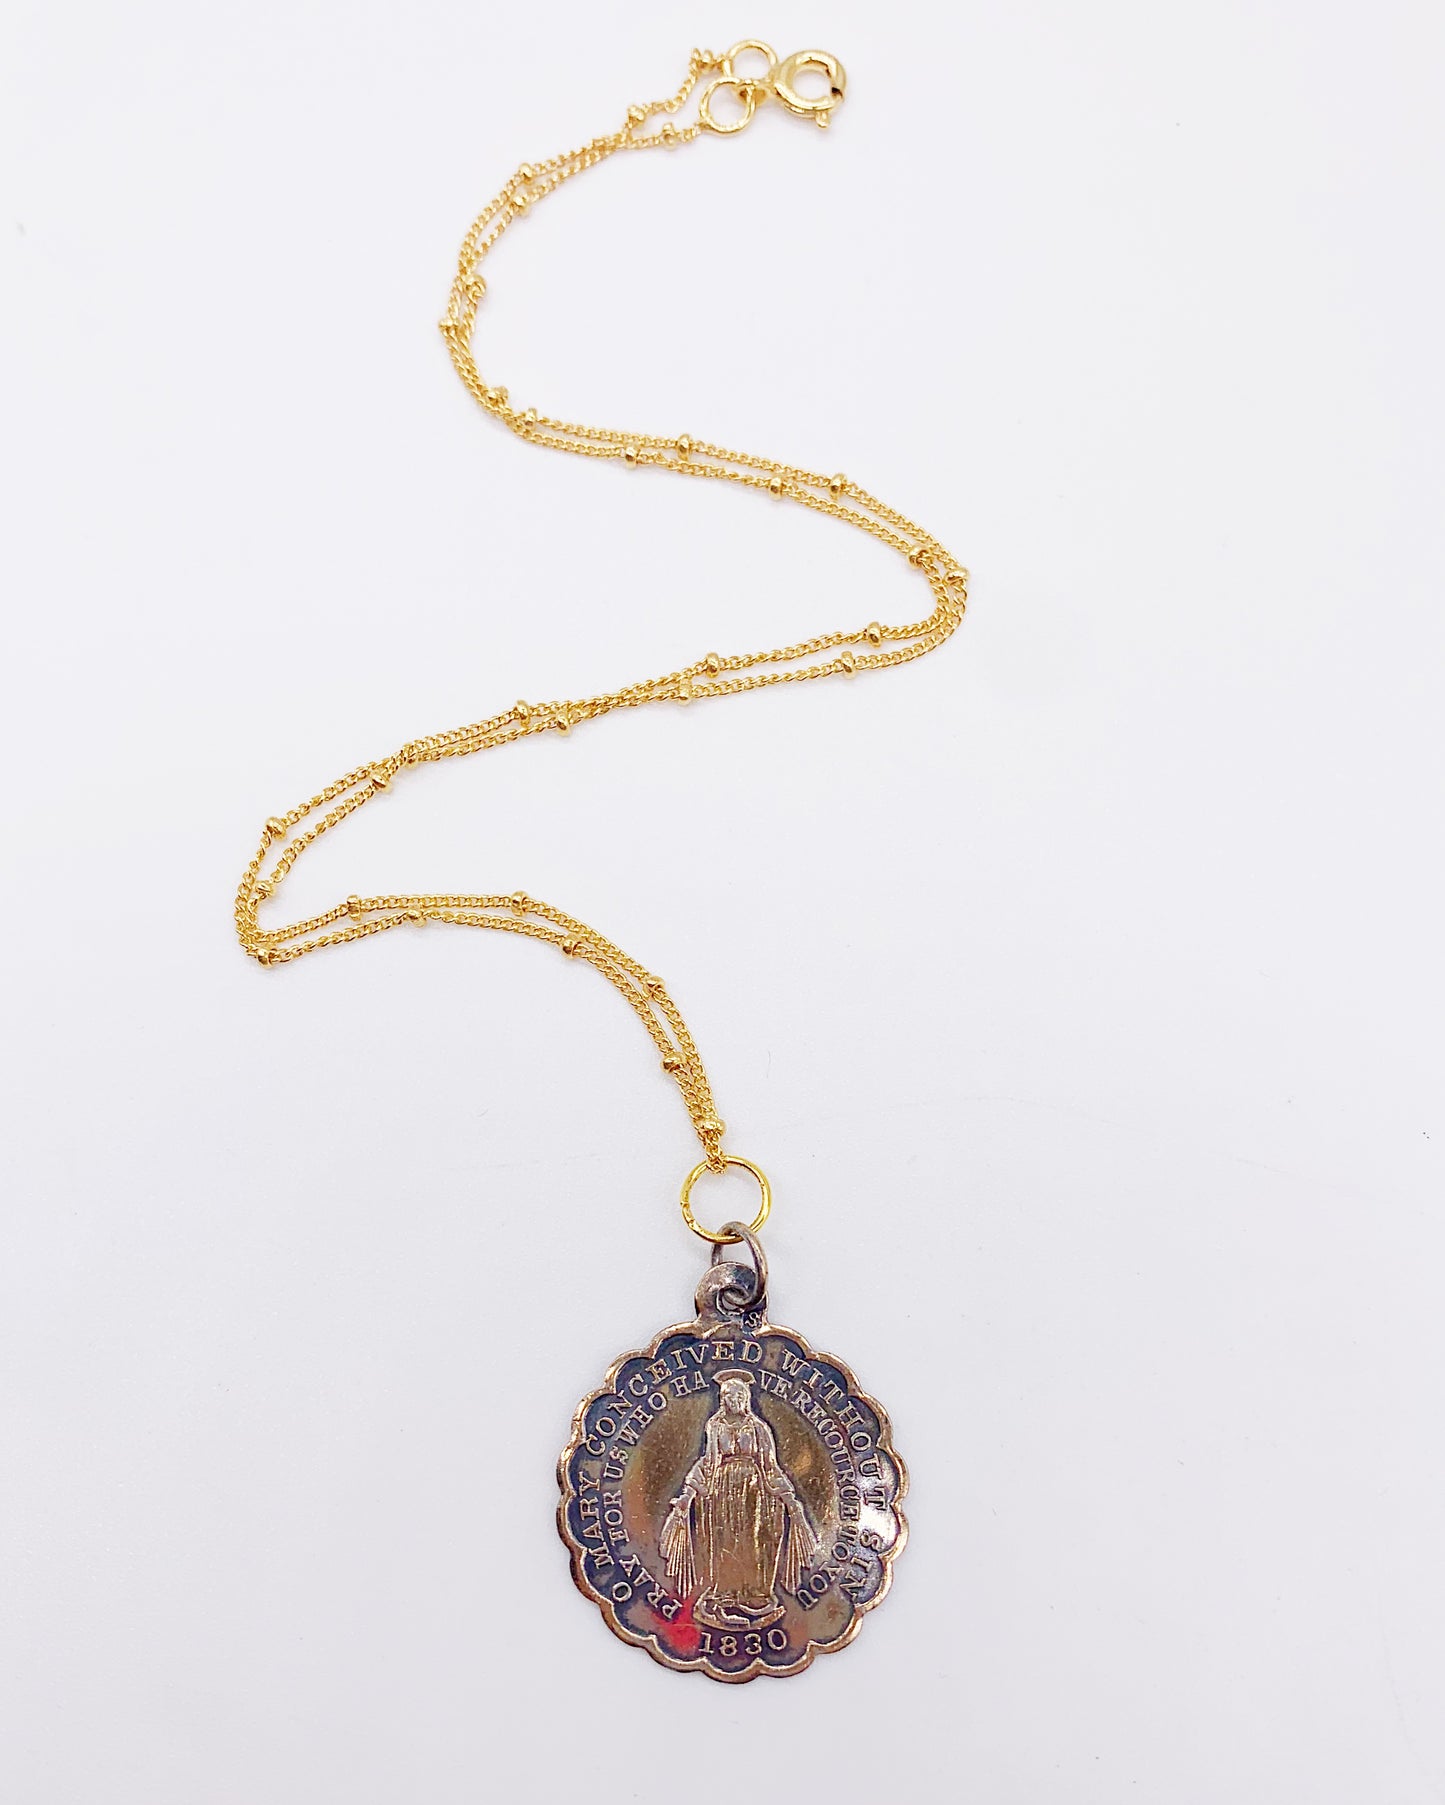 1830 SODALITY MEDAL GOLD NECKLACE